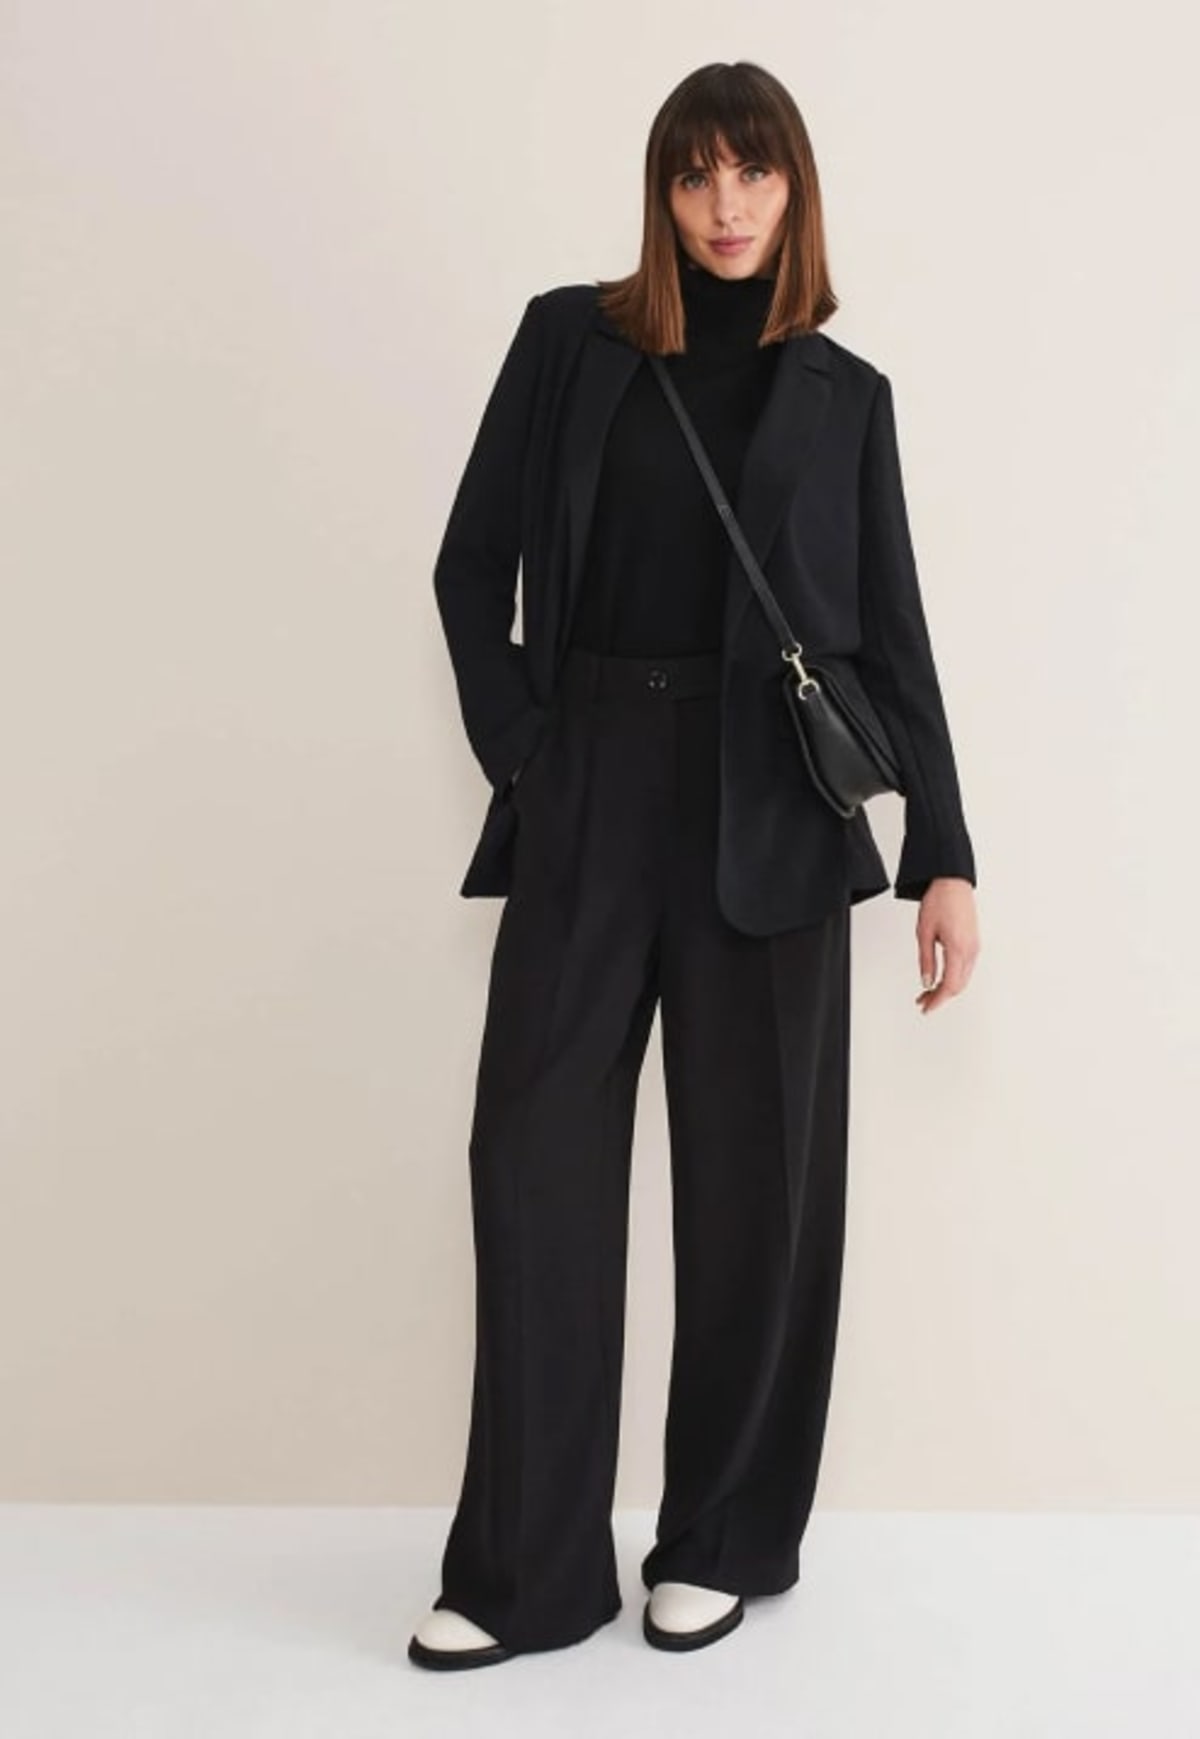 Woman wearing black suit co-ord with black handbag